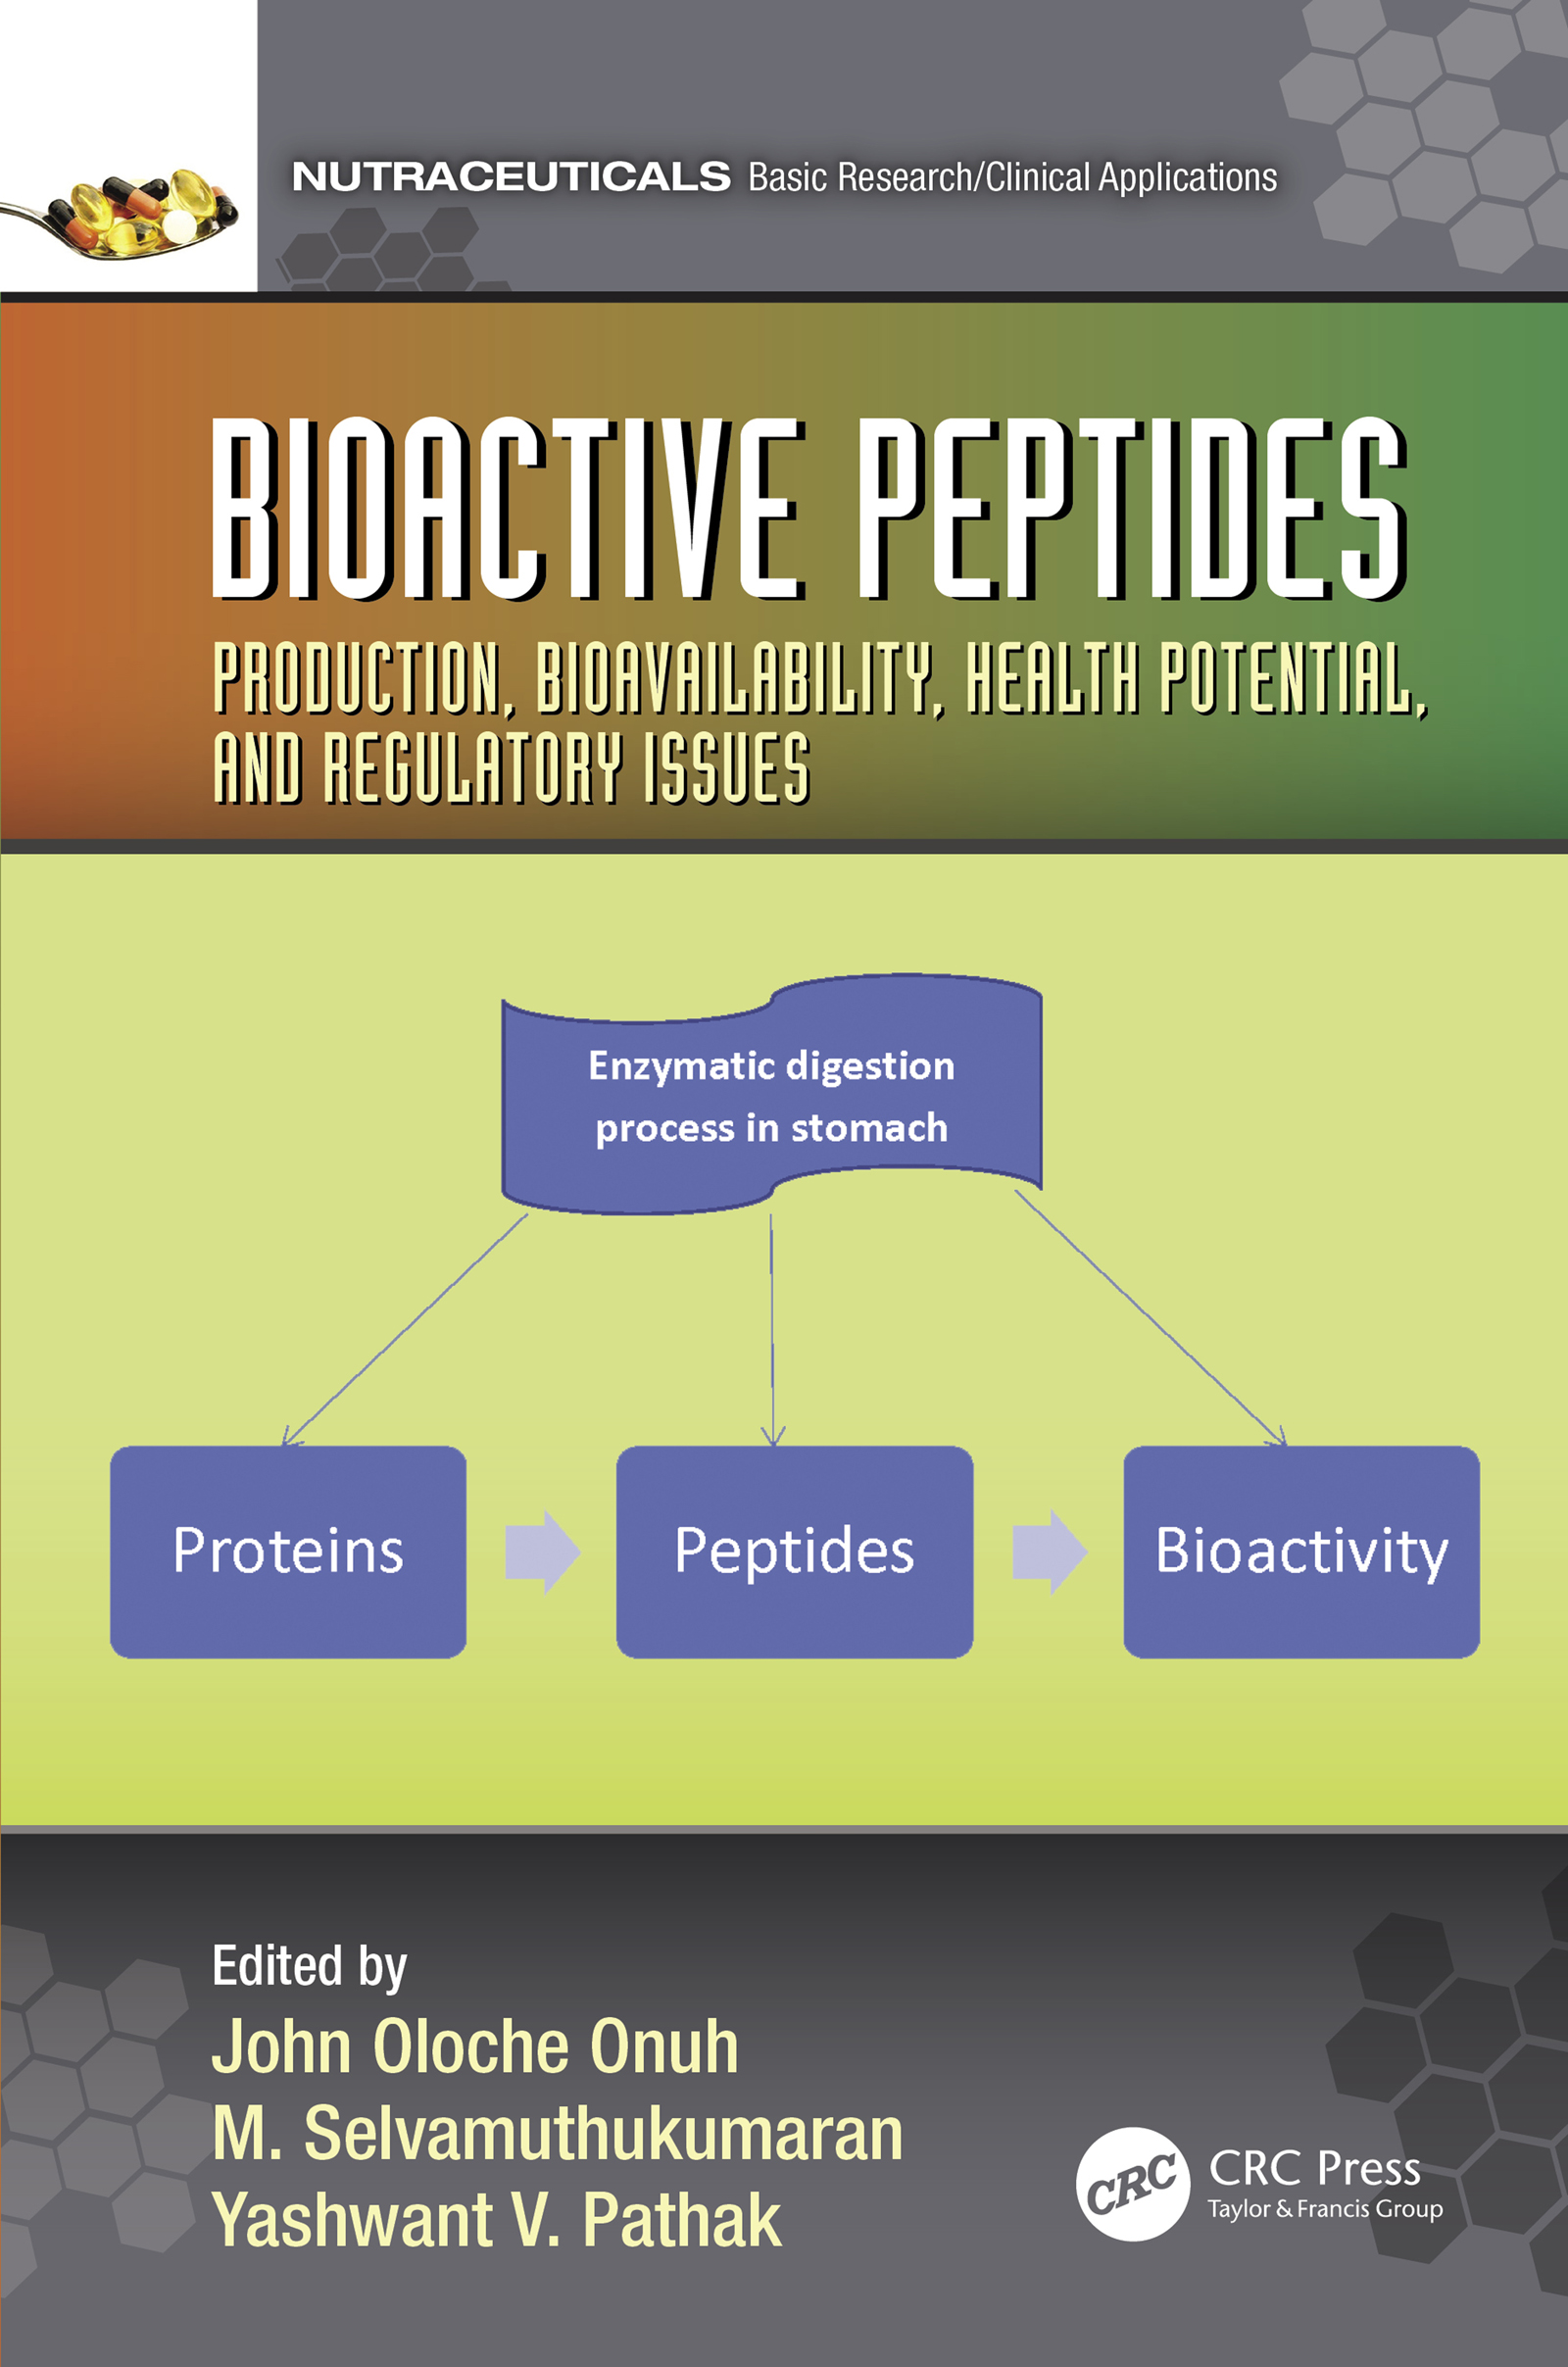 Bioactive Peptides Production, Bioavailability, Health Potential and Regulatory.jpg